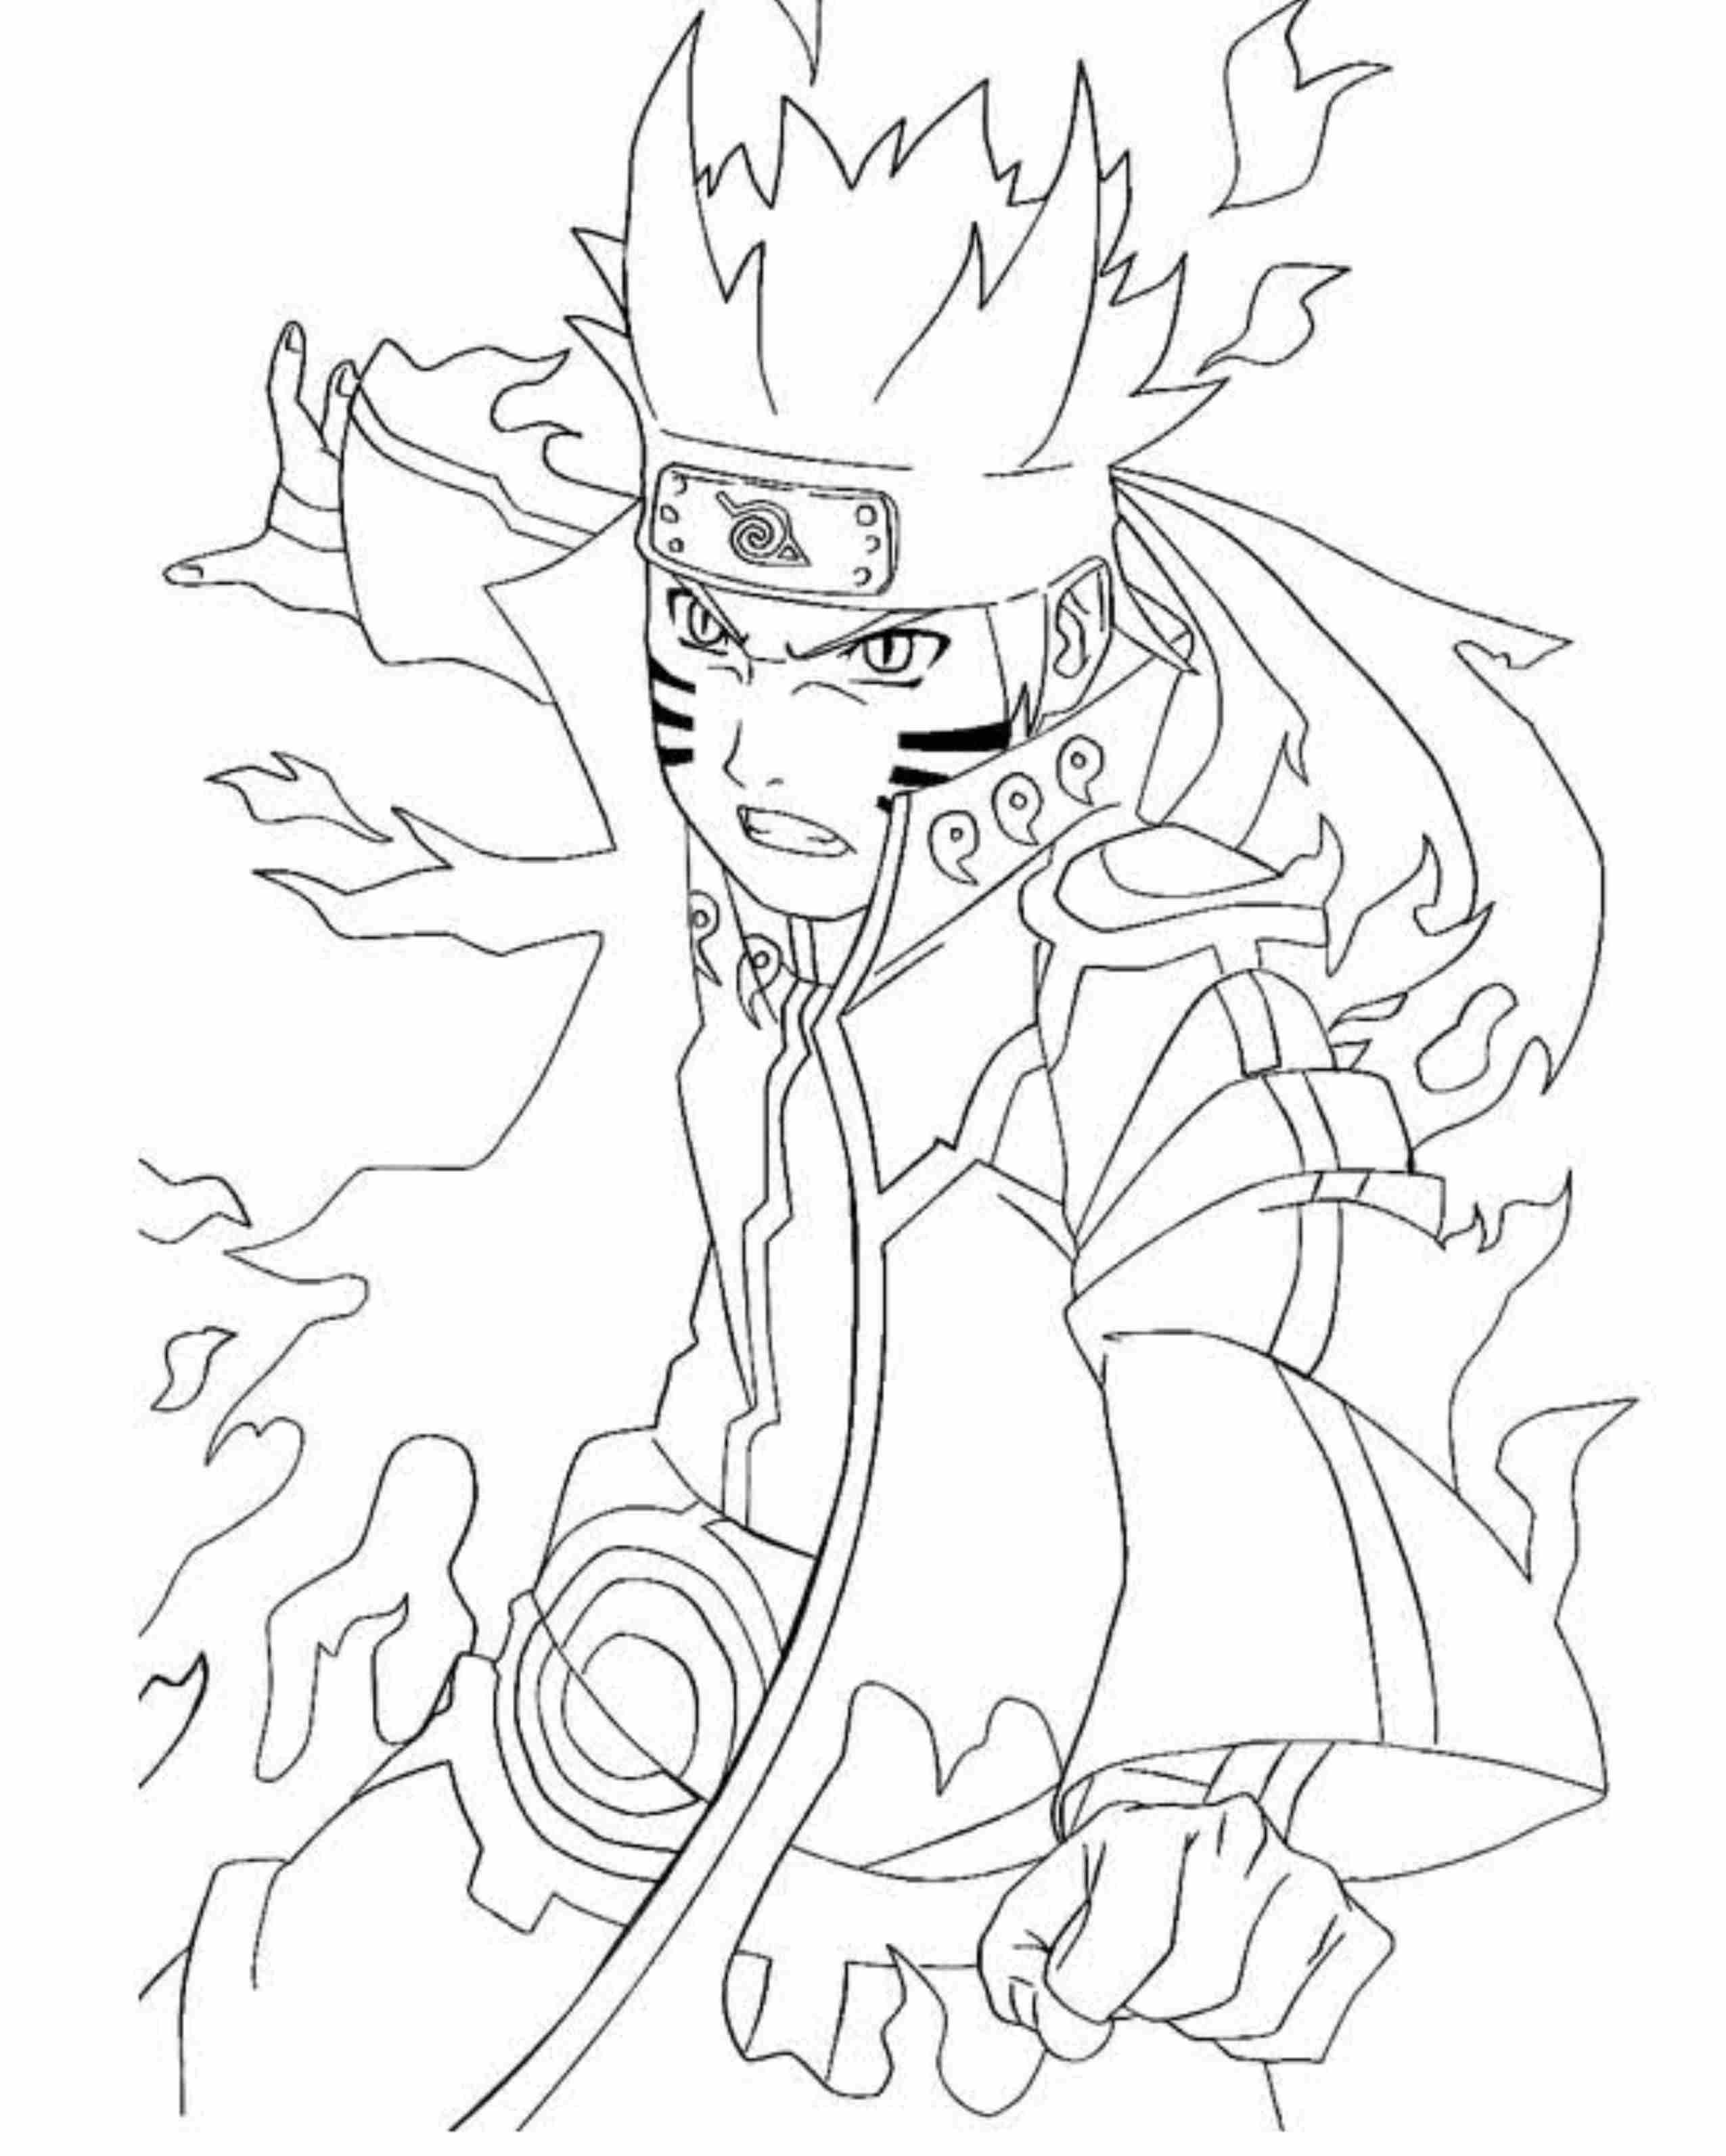 Naruto Shippuden Coloring Pages
 Printable Naruto Coloring Pages to Get Your Kids Occupied